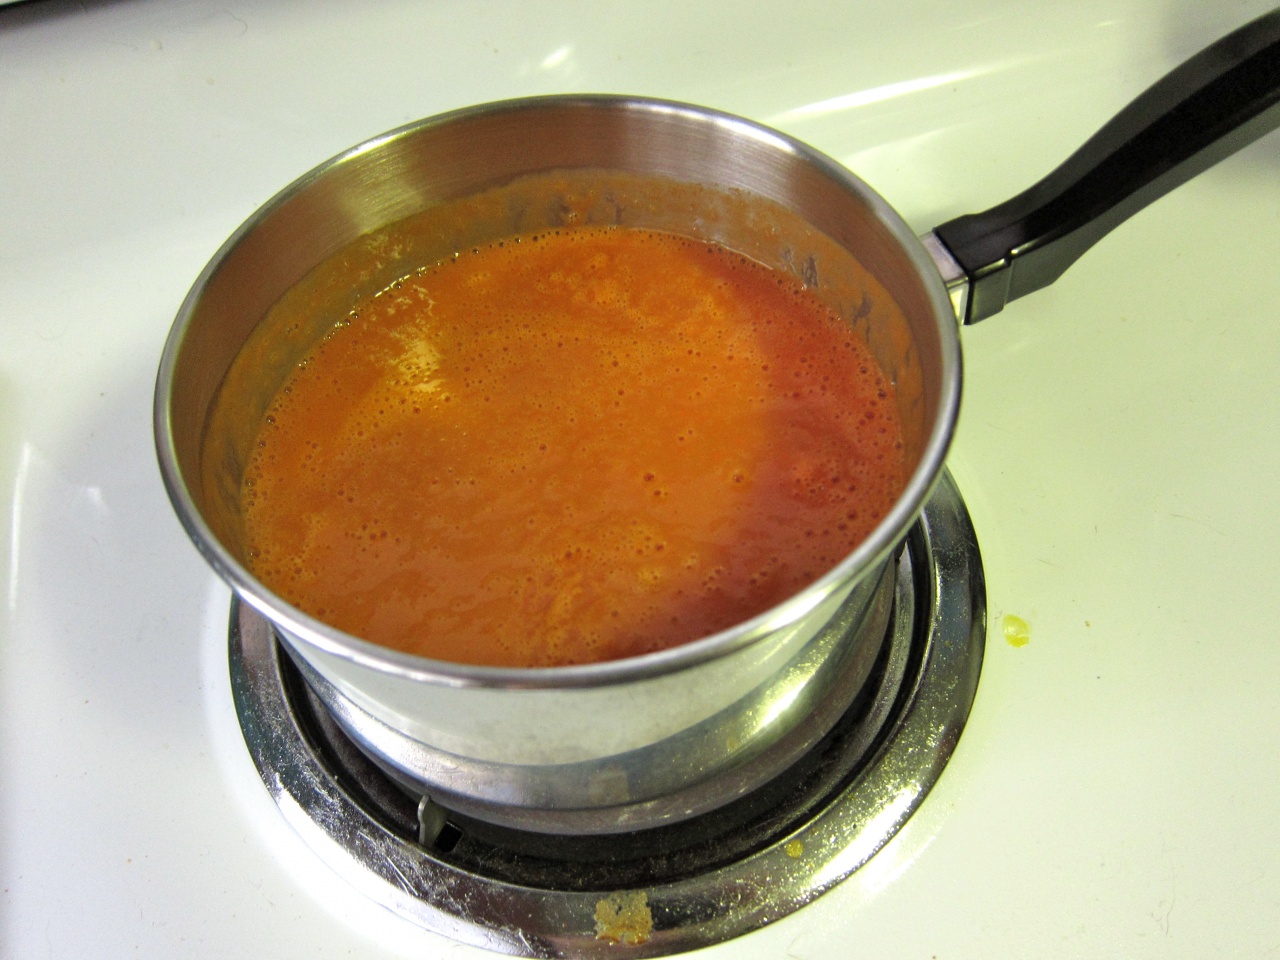 Heating up tomato soup